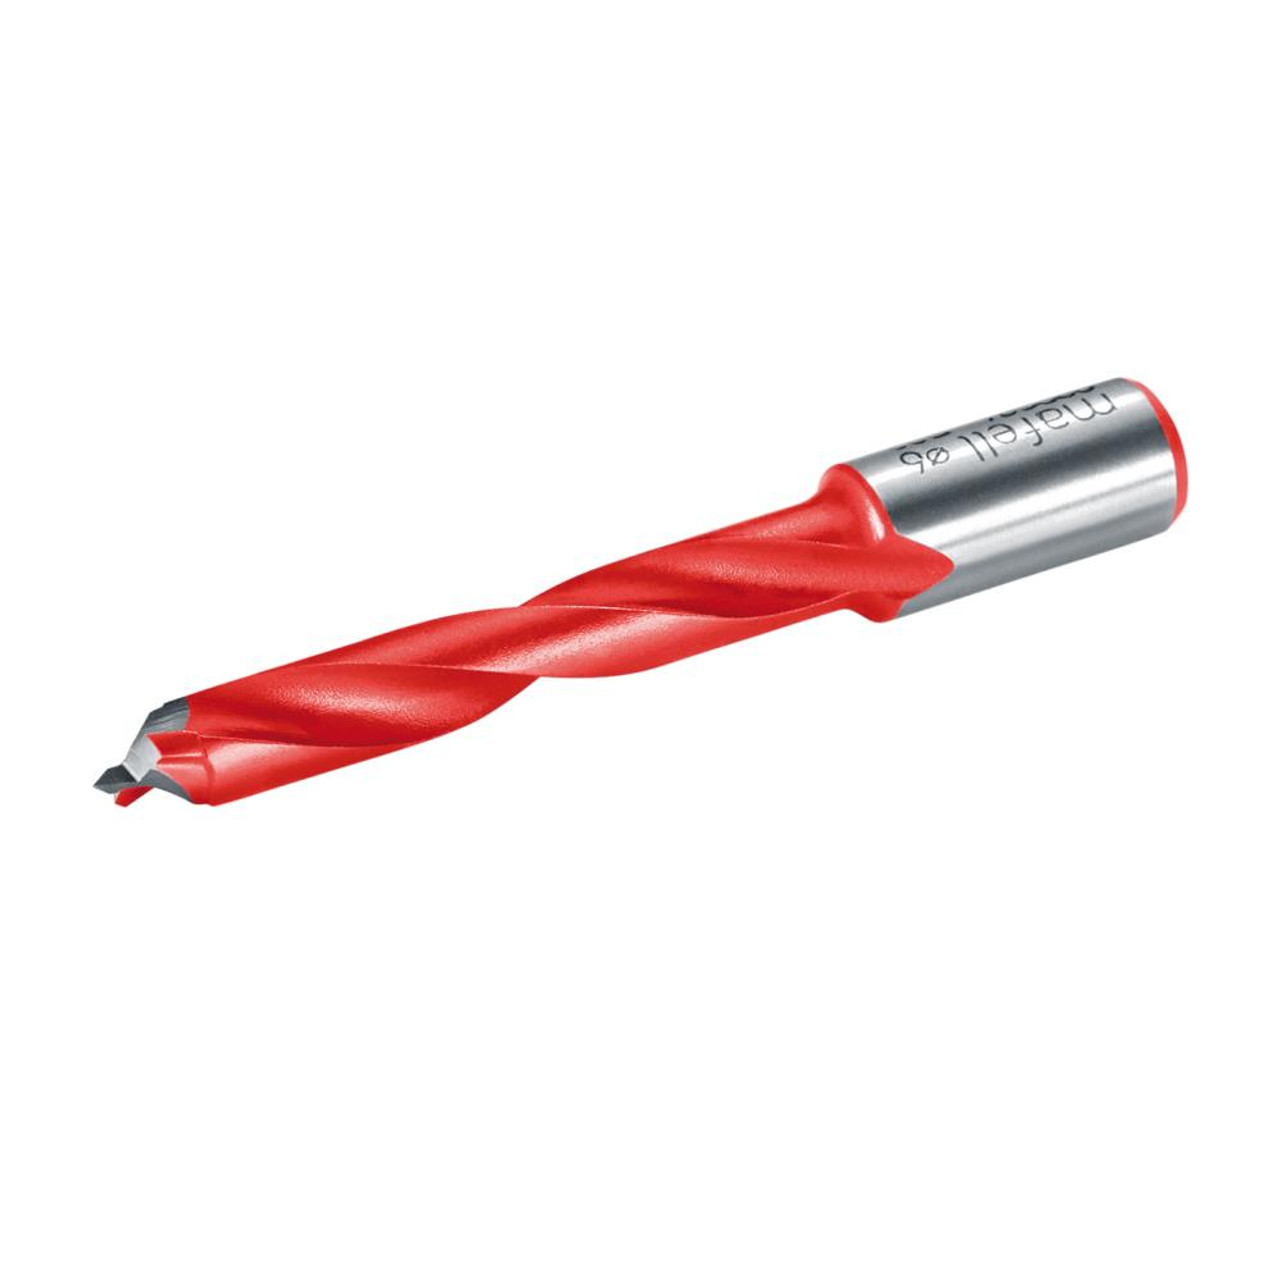 Buy Online a Dowel Drill from DuoDowler for Dowel Drill from MAFELL with Ø 12.2 mm Drill for the Carpentry and Woodworking Industry and Carpenters in Australia and New Zealand